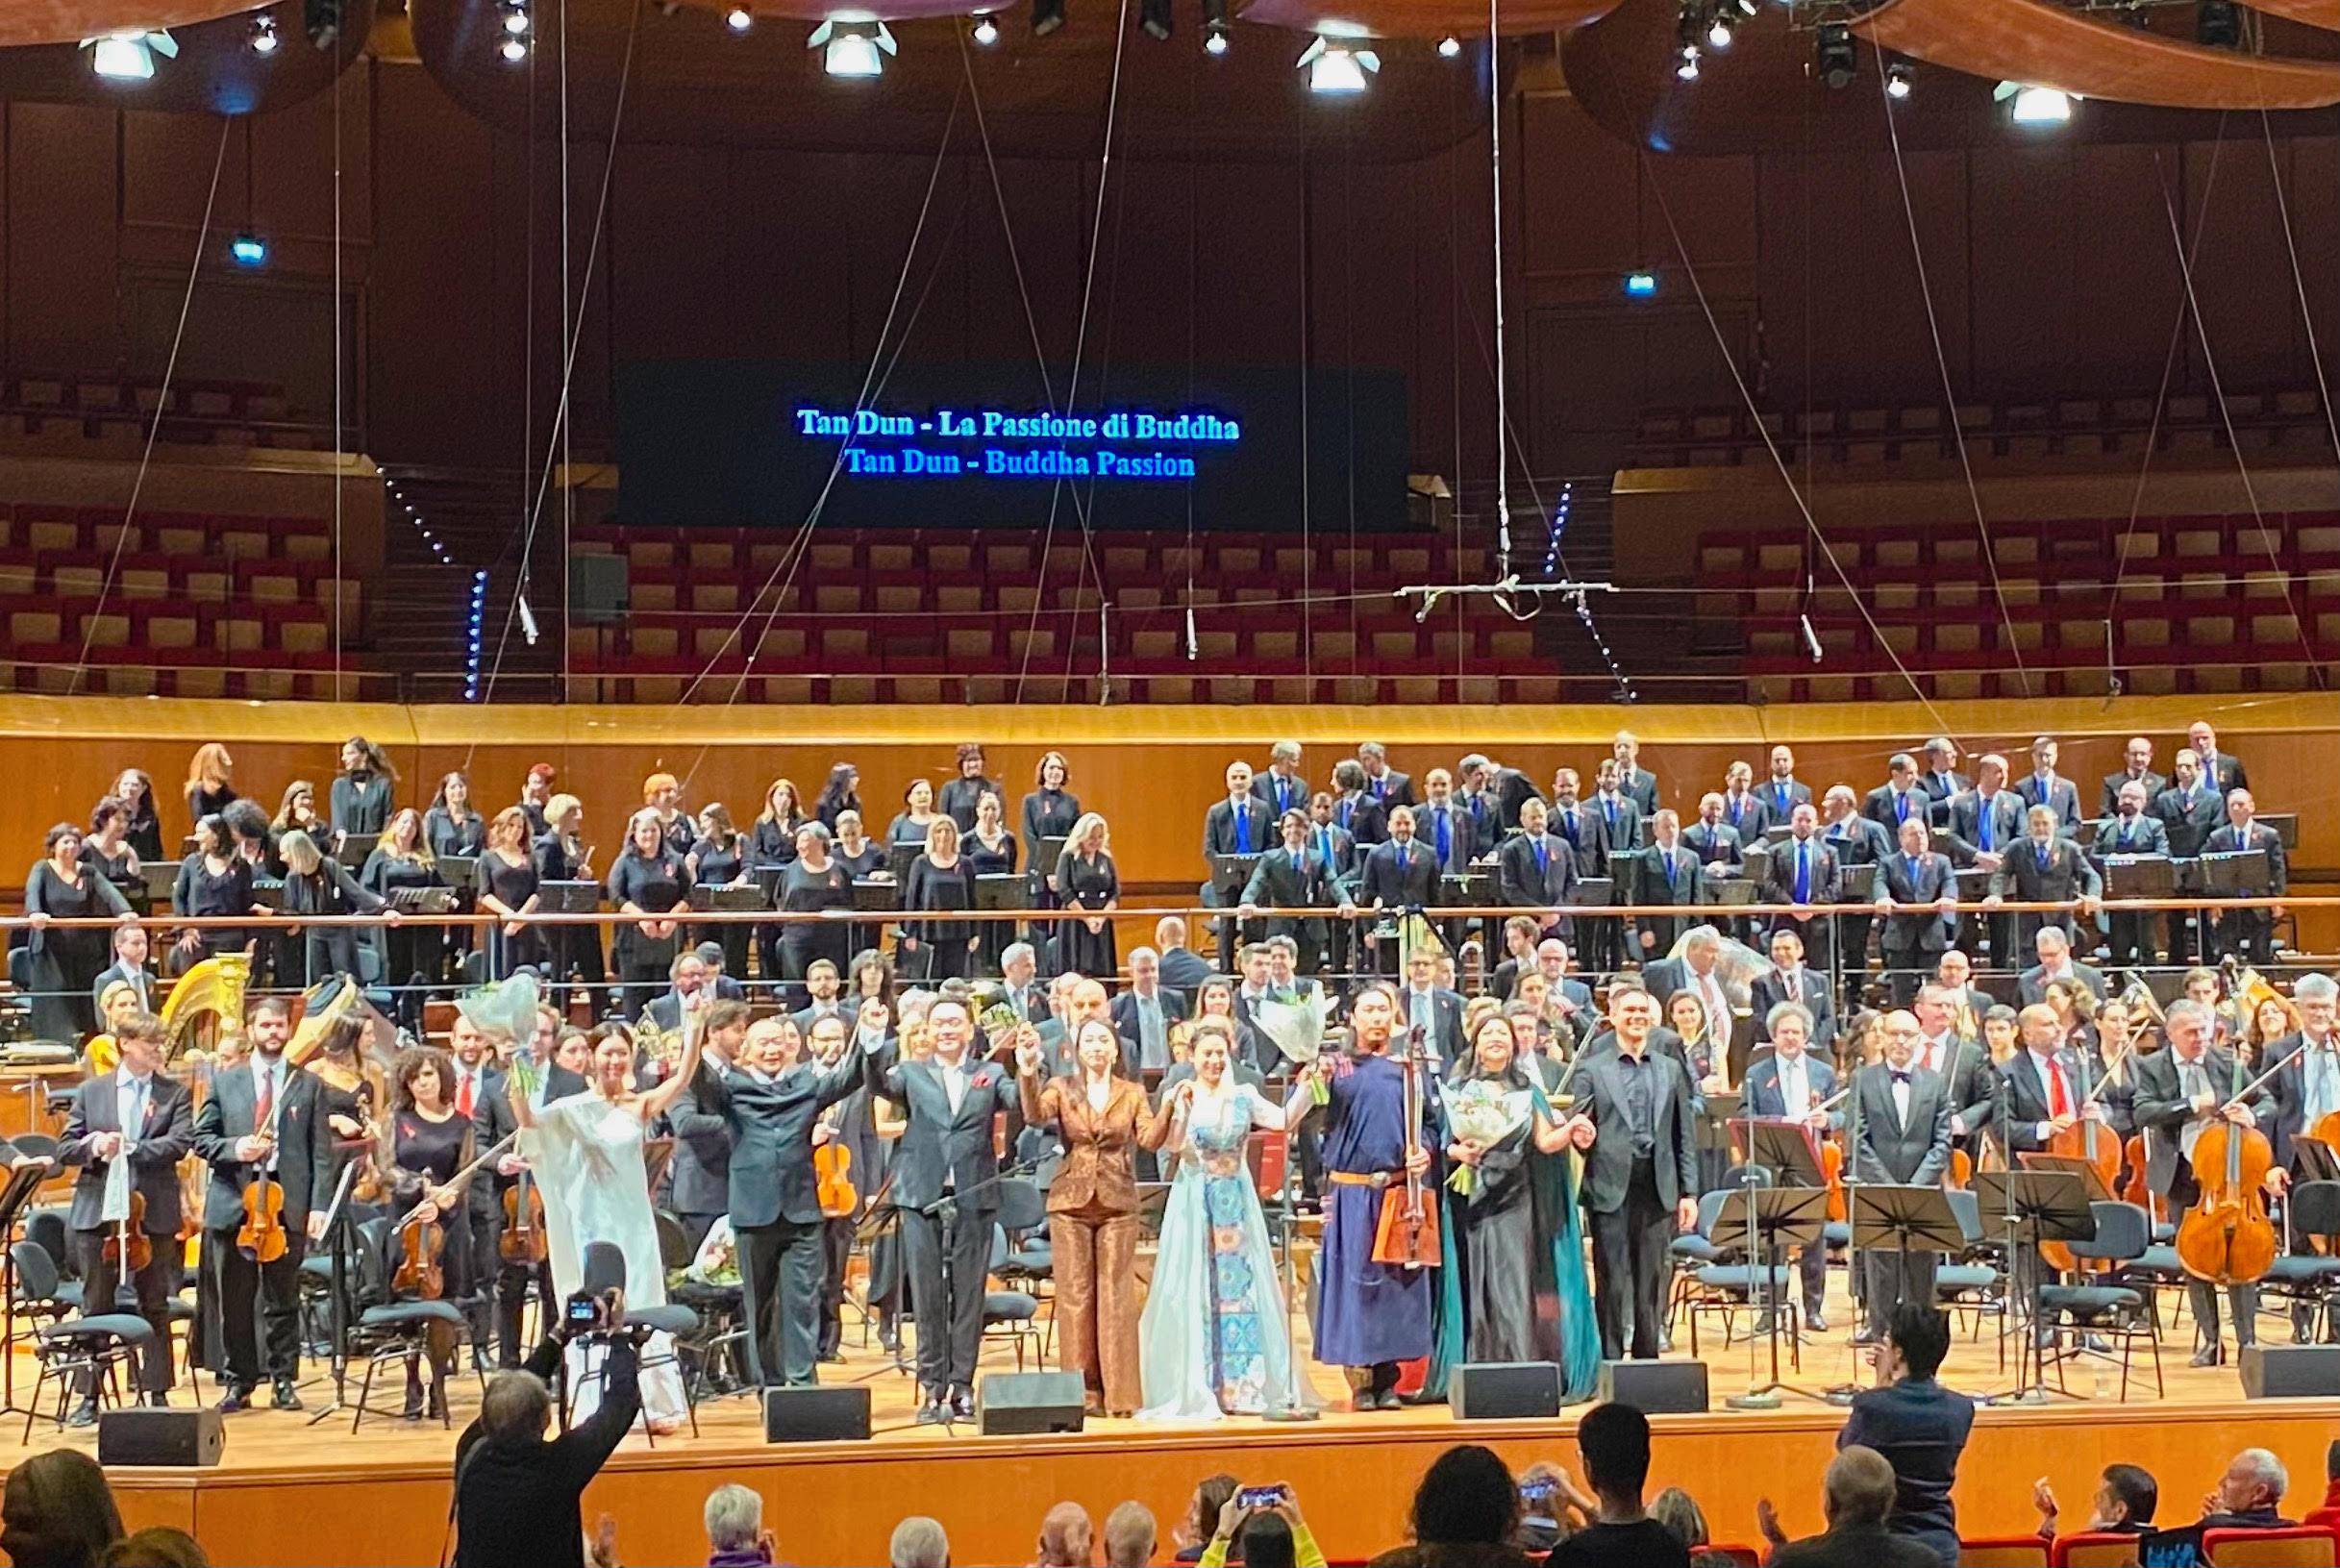 Internationally renowned composer and conductor Tan Dun and his cast, including Hong Kong soprano Candice Chung, and members of the Accademia Nazionale di Santa Cecilia, were warmly applauded by an enthusiastic audience after the Italian premiere of "Buddha Passion" in Rome, Italy on November 23 (Italian time).